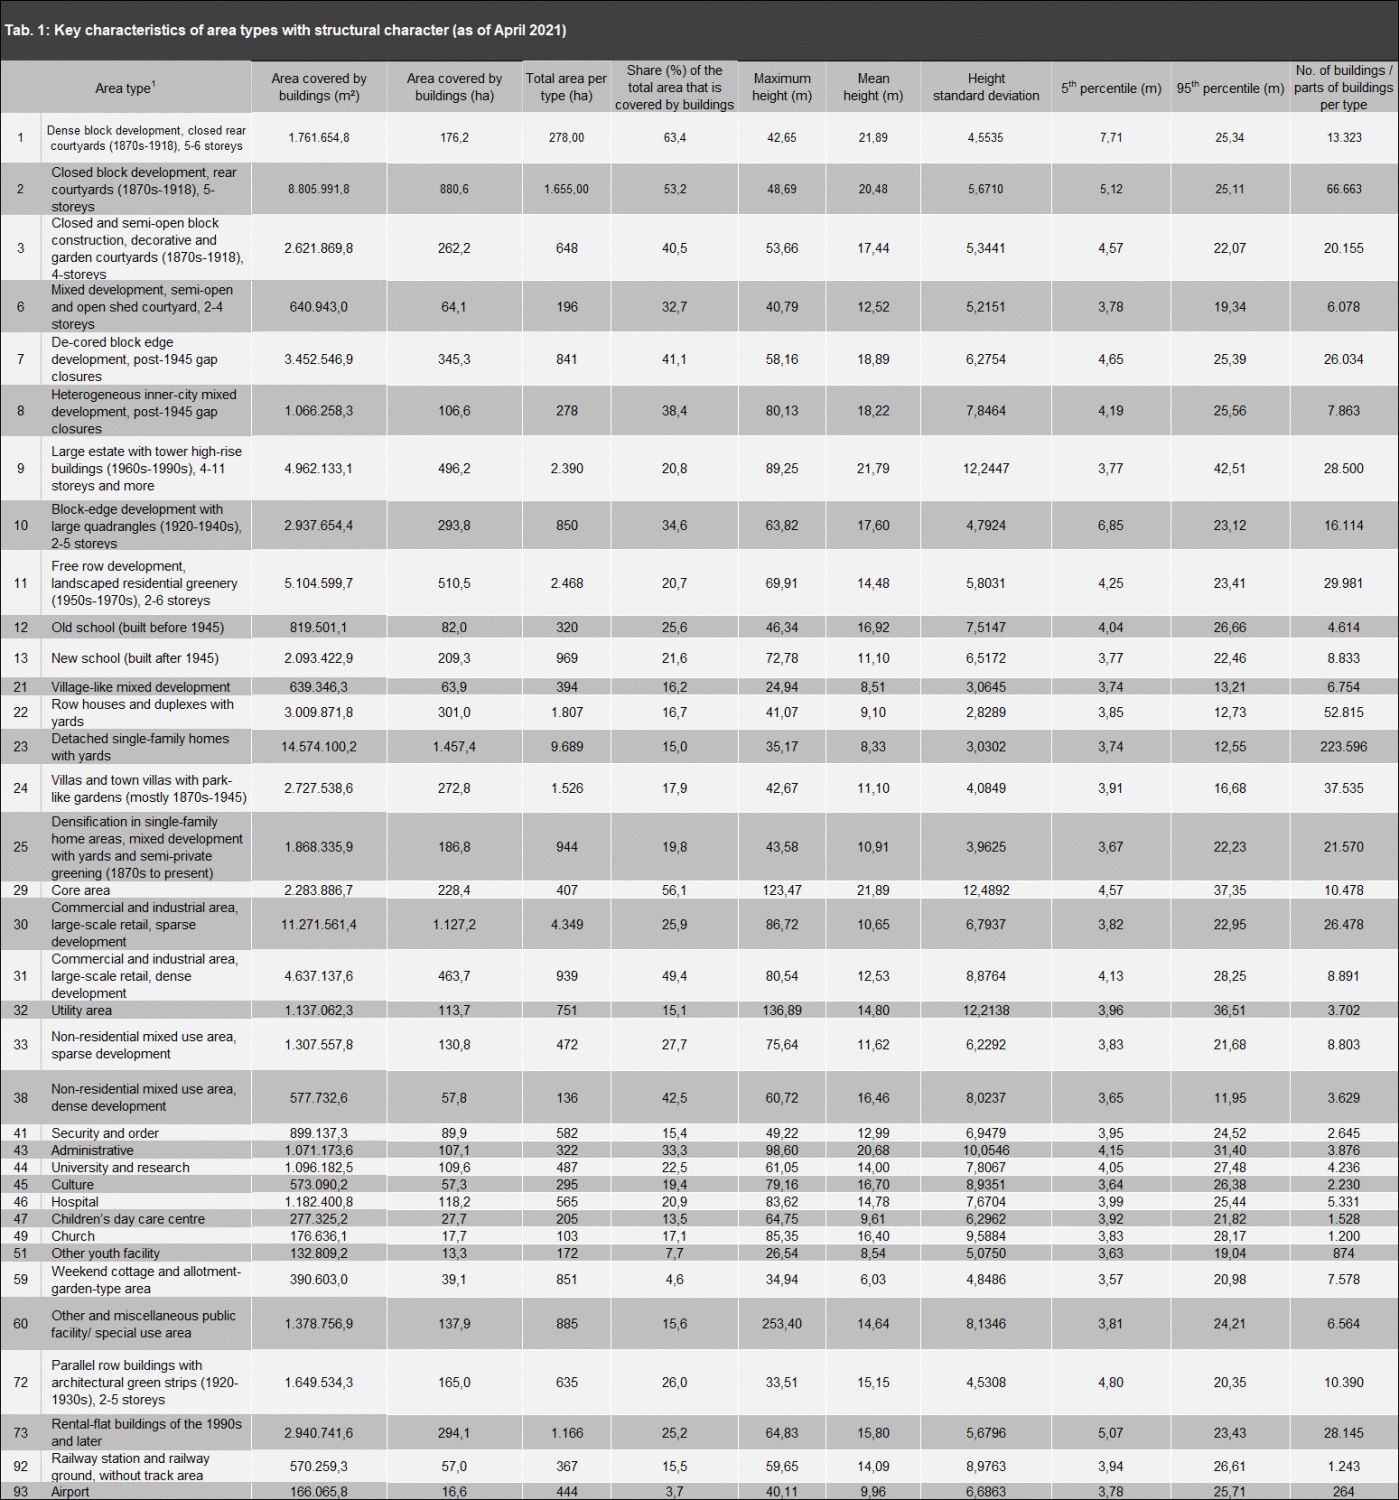 Enlarge photo: Tab. 1: Mean building heights and other statistical parameters per area type with structural character (area type mapping as of December 31, 2020, building heights according to LoD2 as of April 6, 2021)